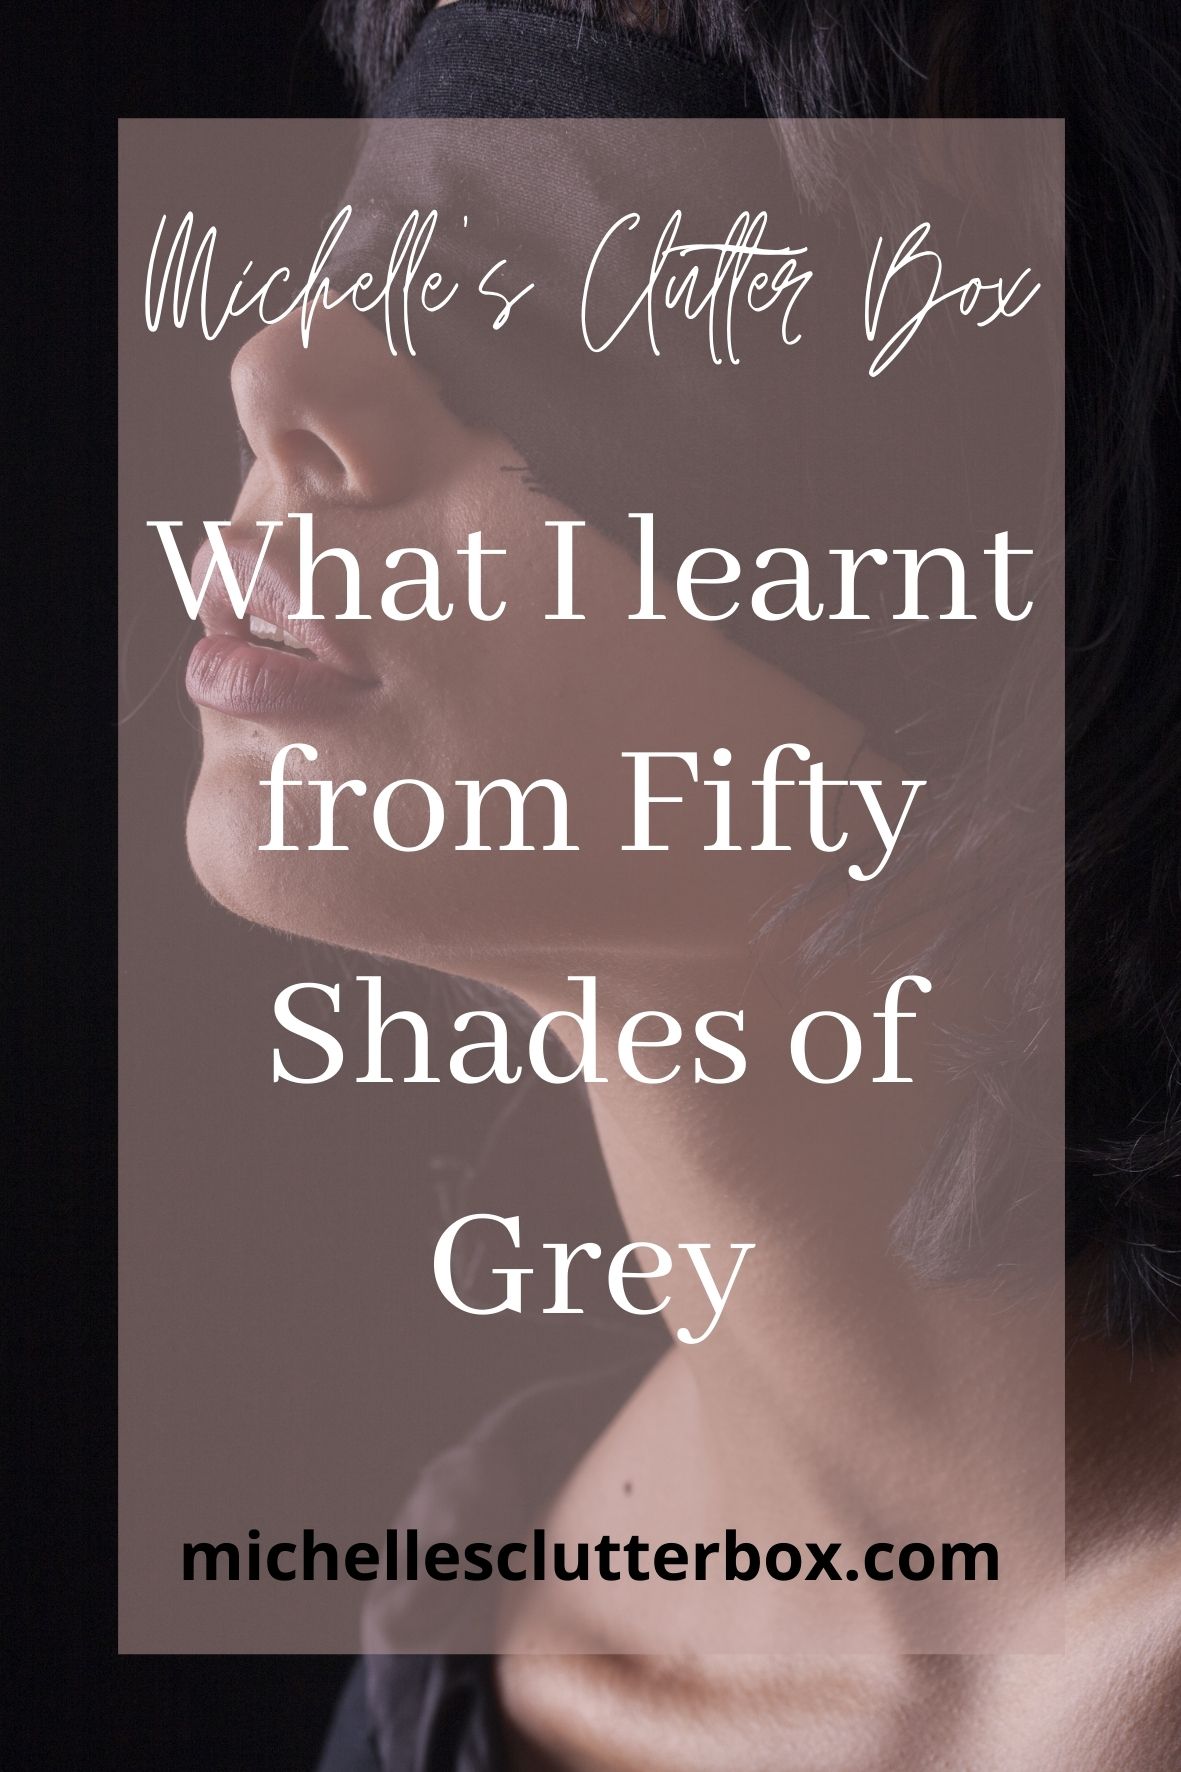 What I learnt from Fifty shades of grey